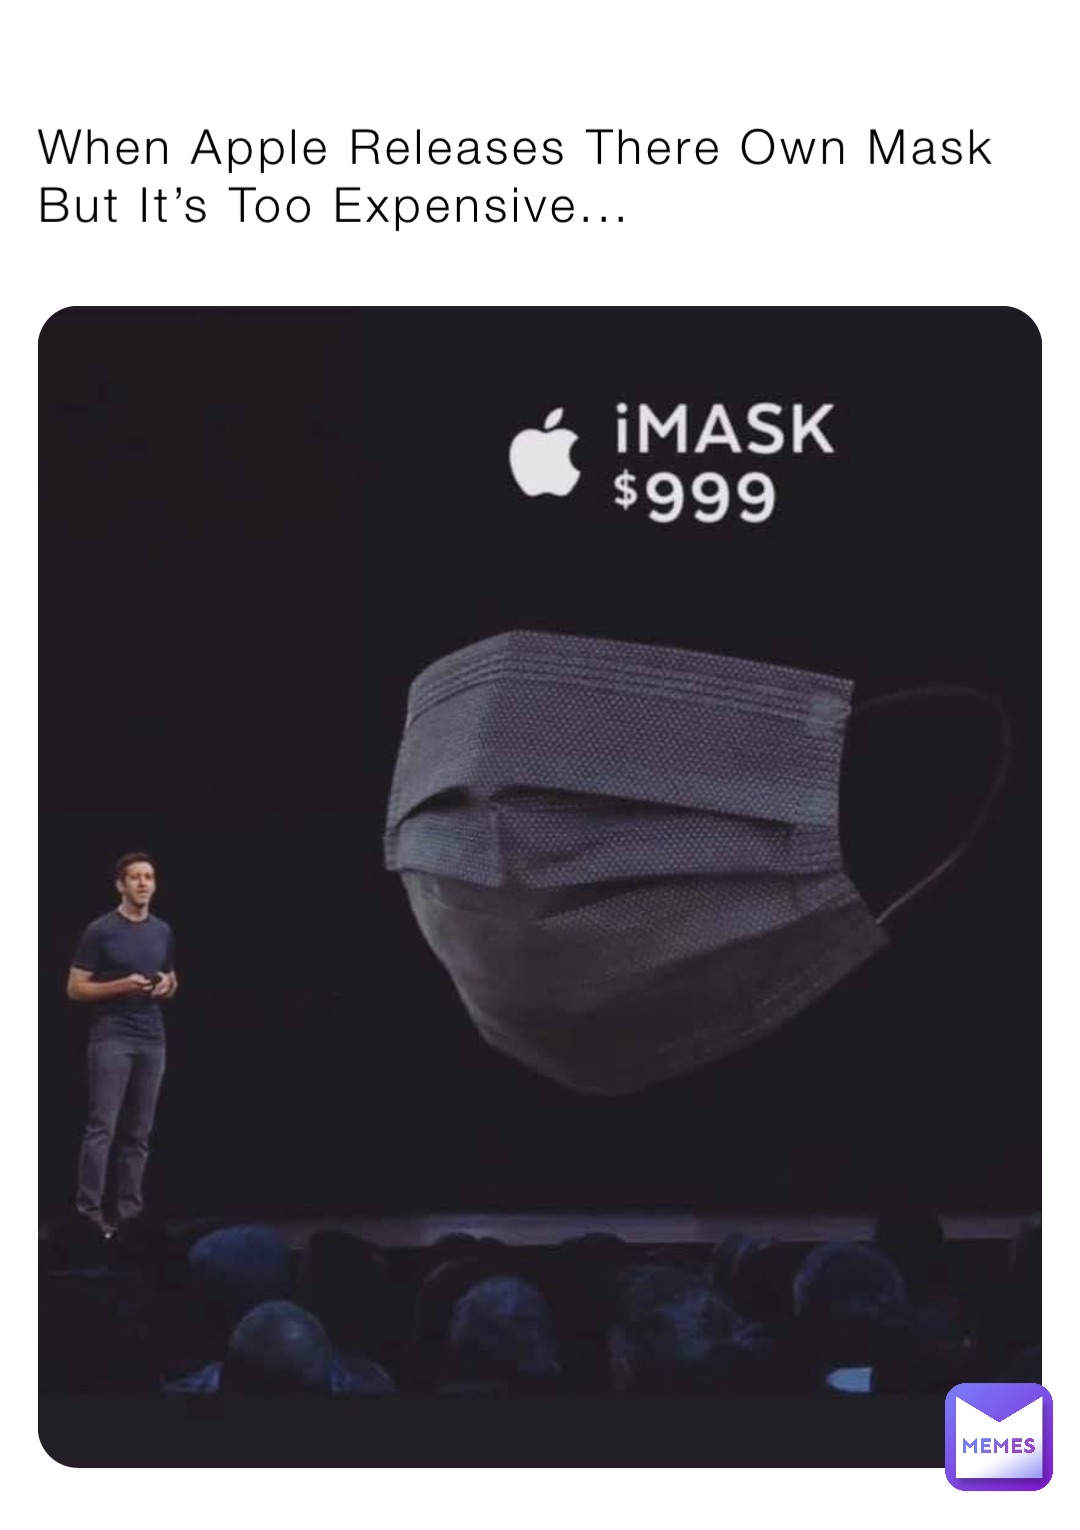 When Apple Releases There Own Mask But It’s Too Expensive...